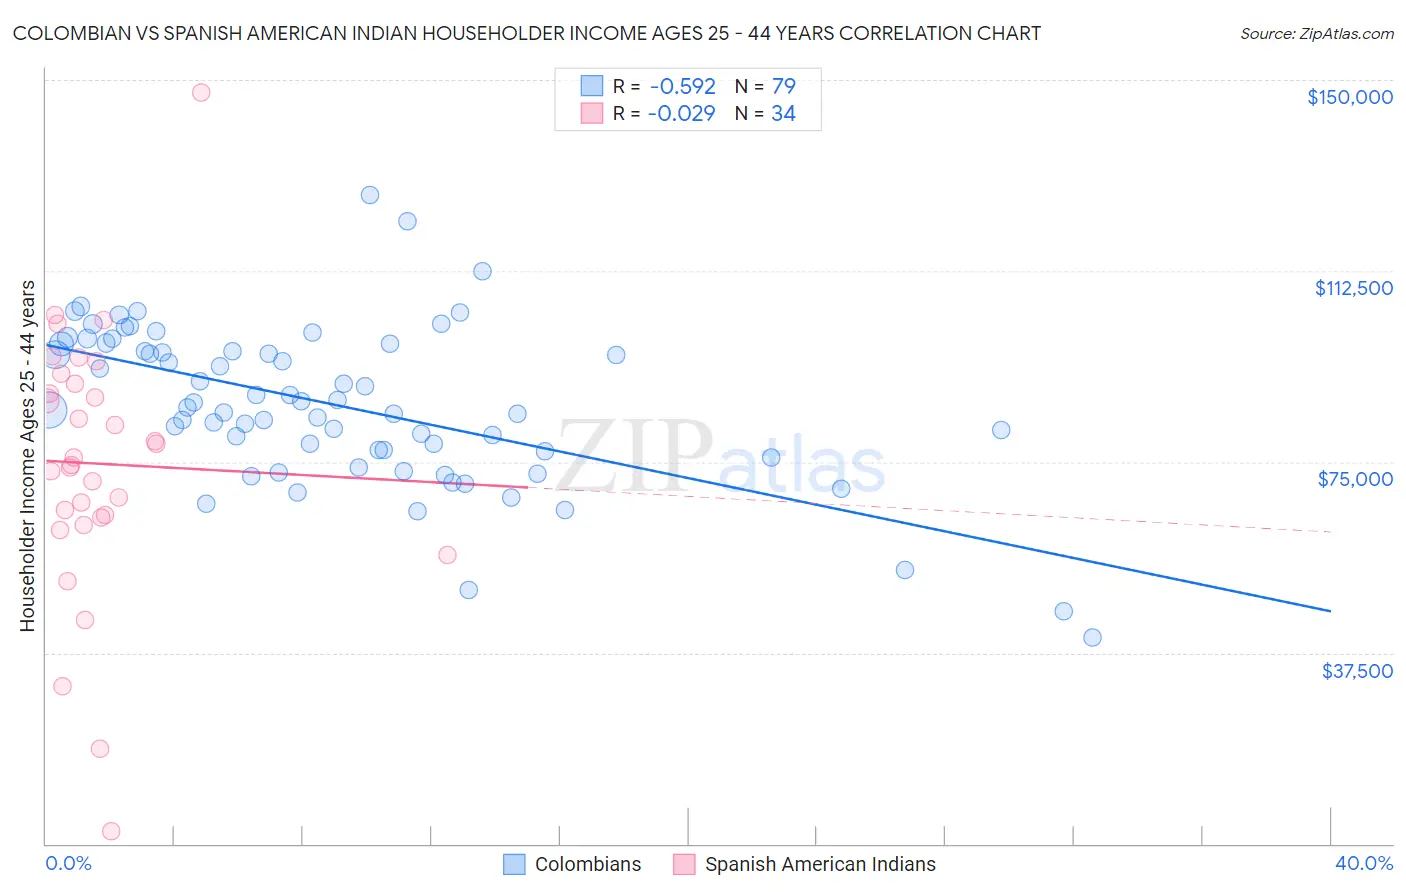 Colombian vs Spanish American Indian Householder Income Ages 25 - 44 years